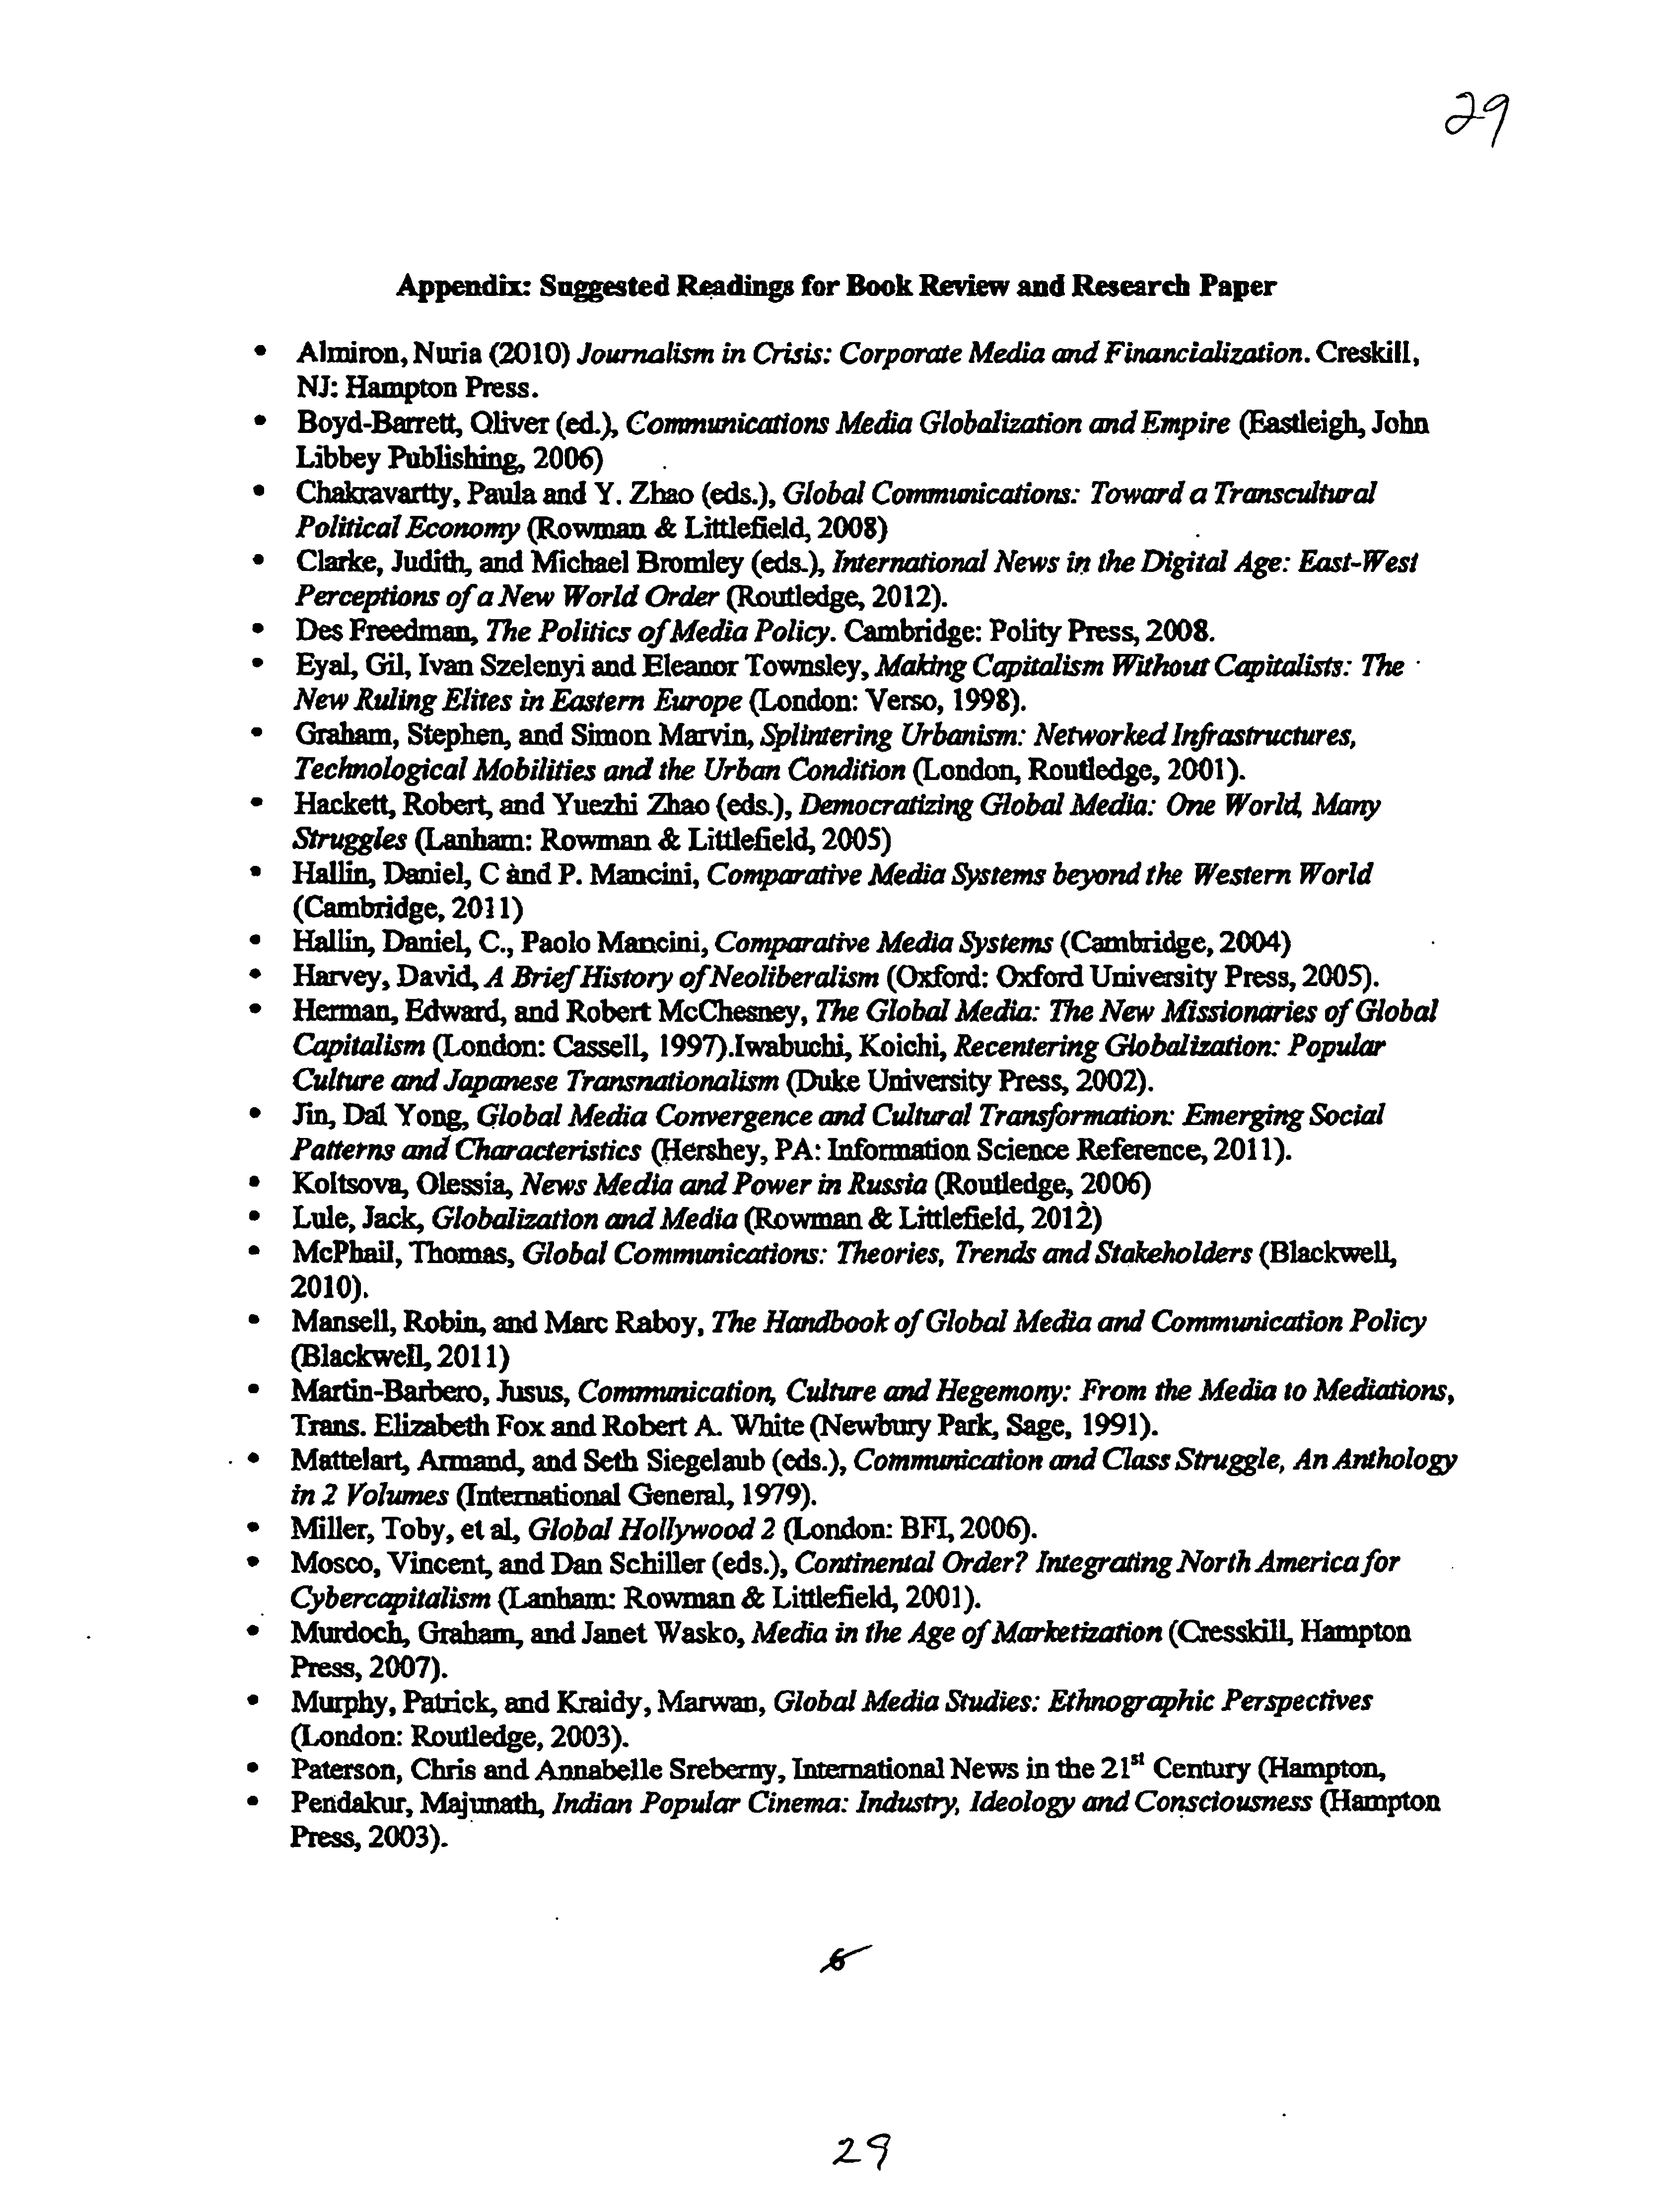 examples of appendices in a research paper